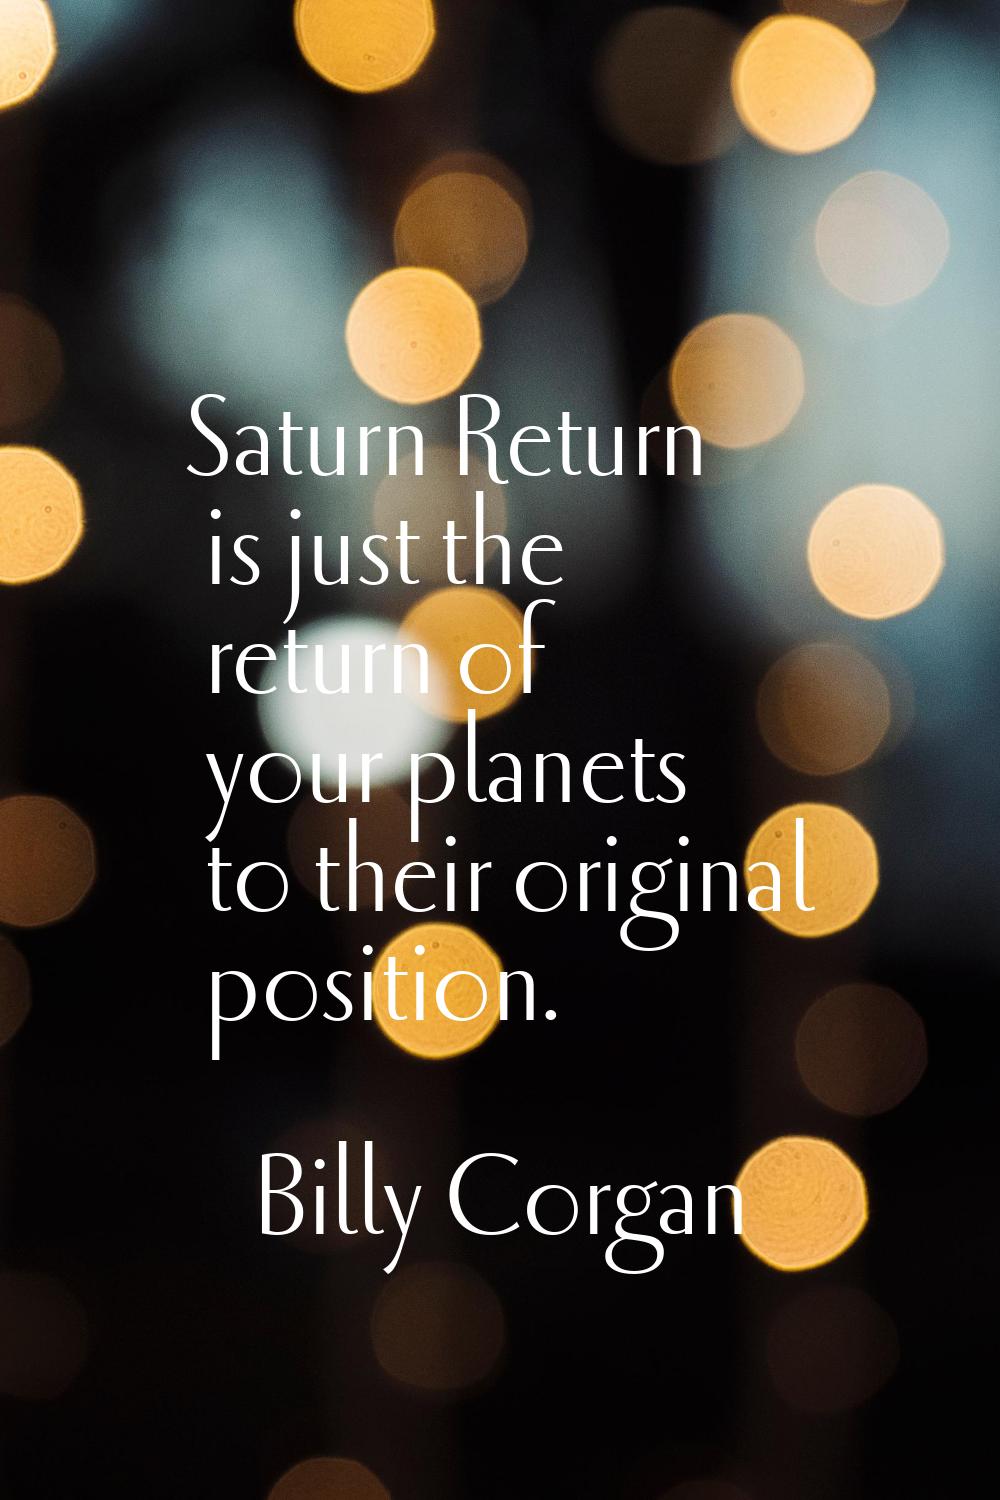 Saturn Return is just the return of your planets to their original position.